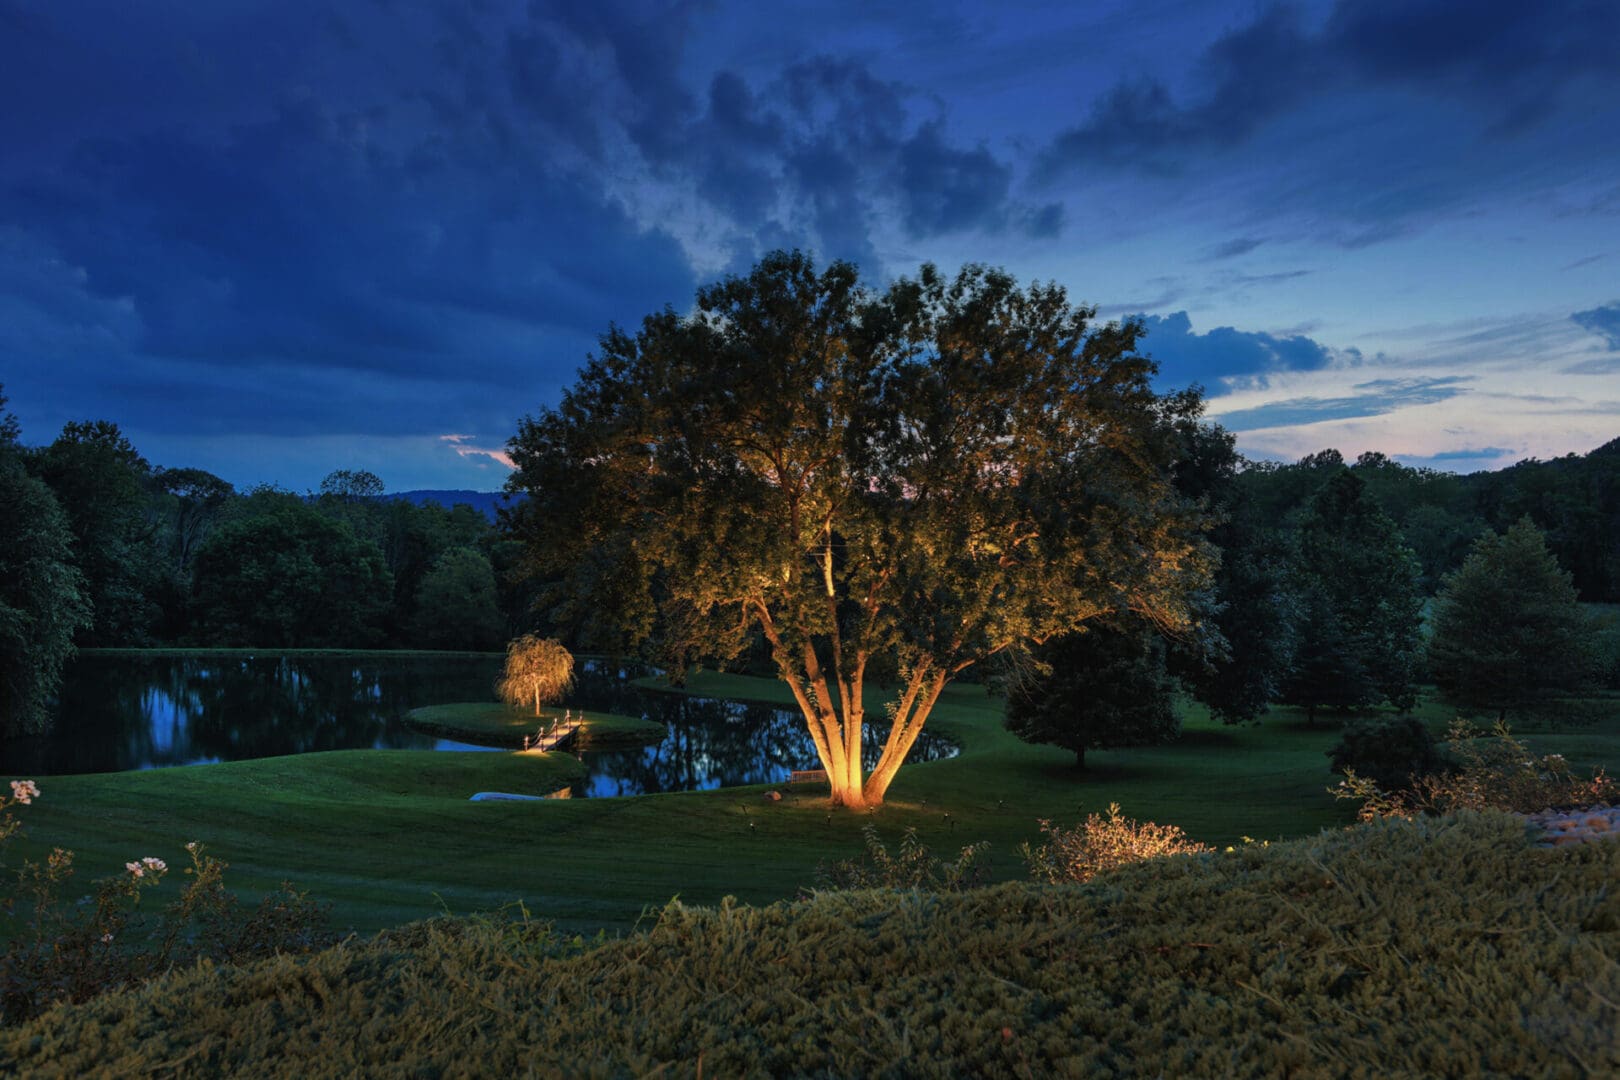 A large tree in the middle of a grassy field, illuminated by outdoor lighting.